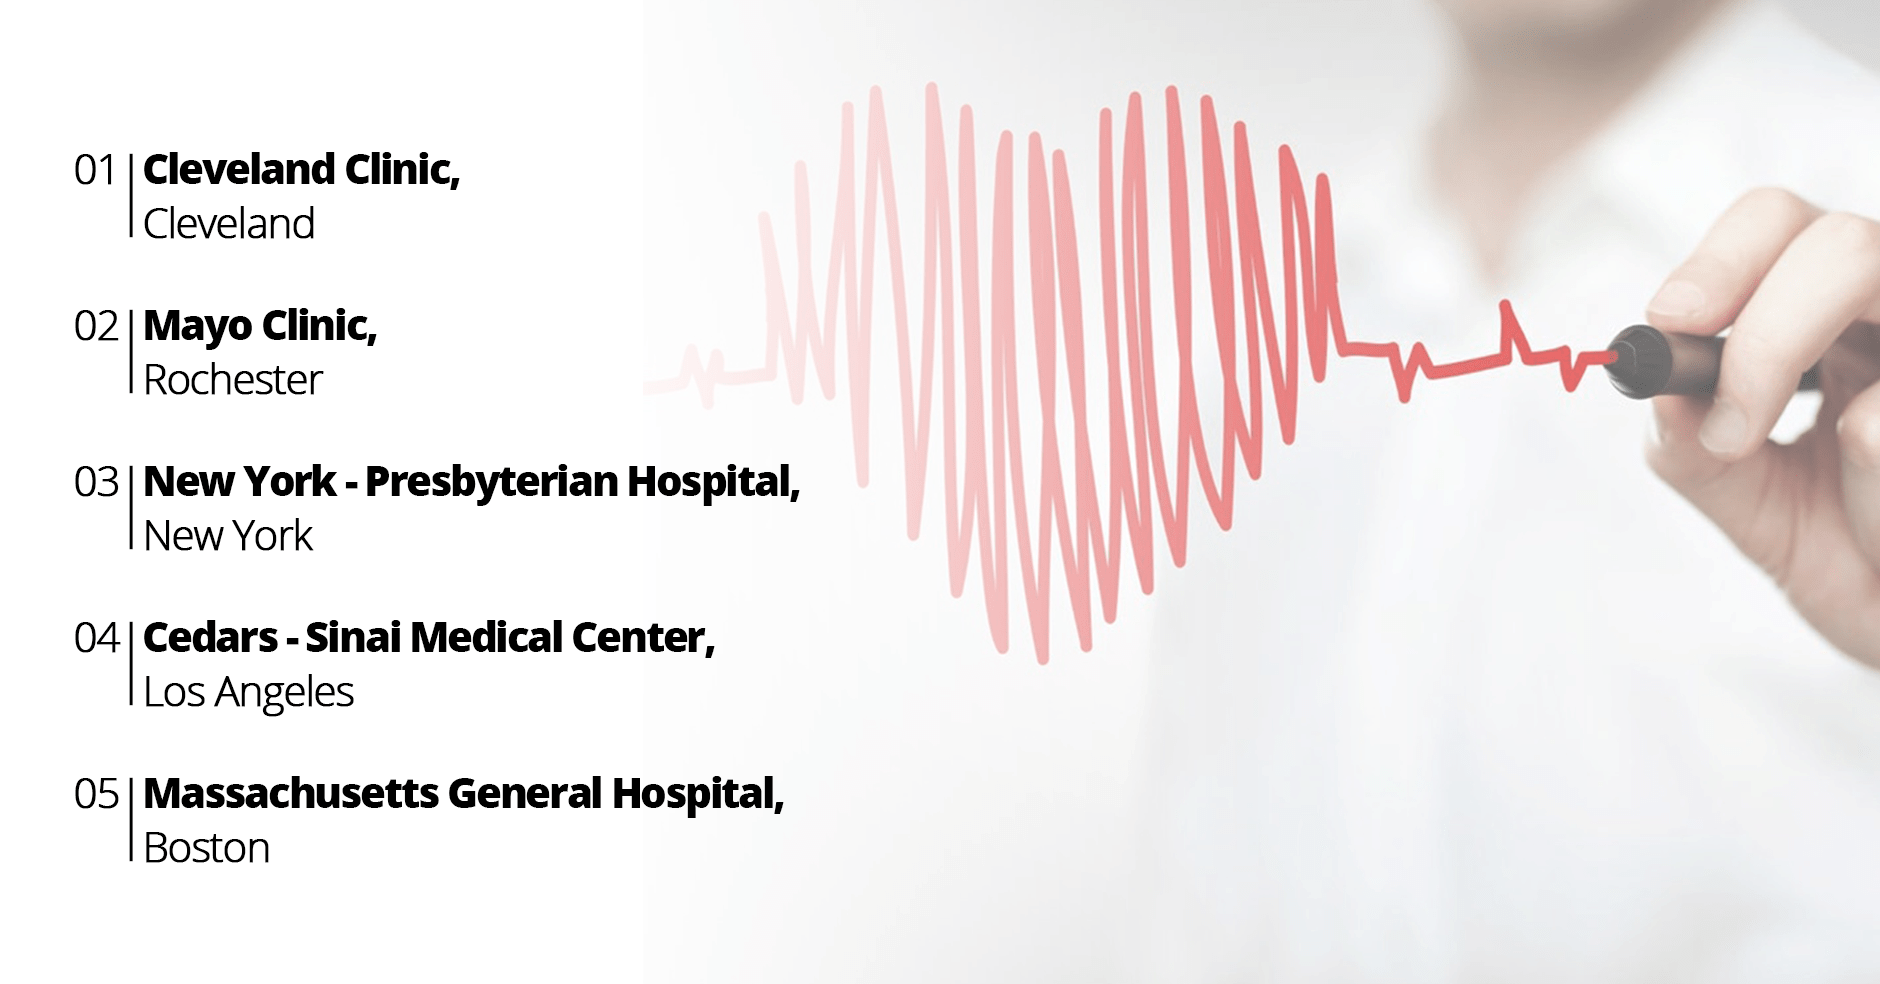 Top 5 Hospitals for Cardiology and Heart Surgery